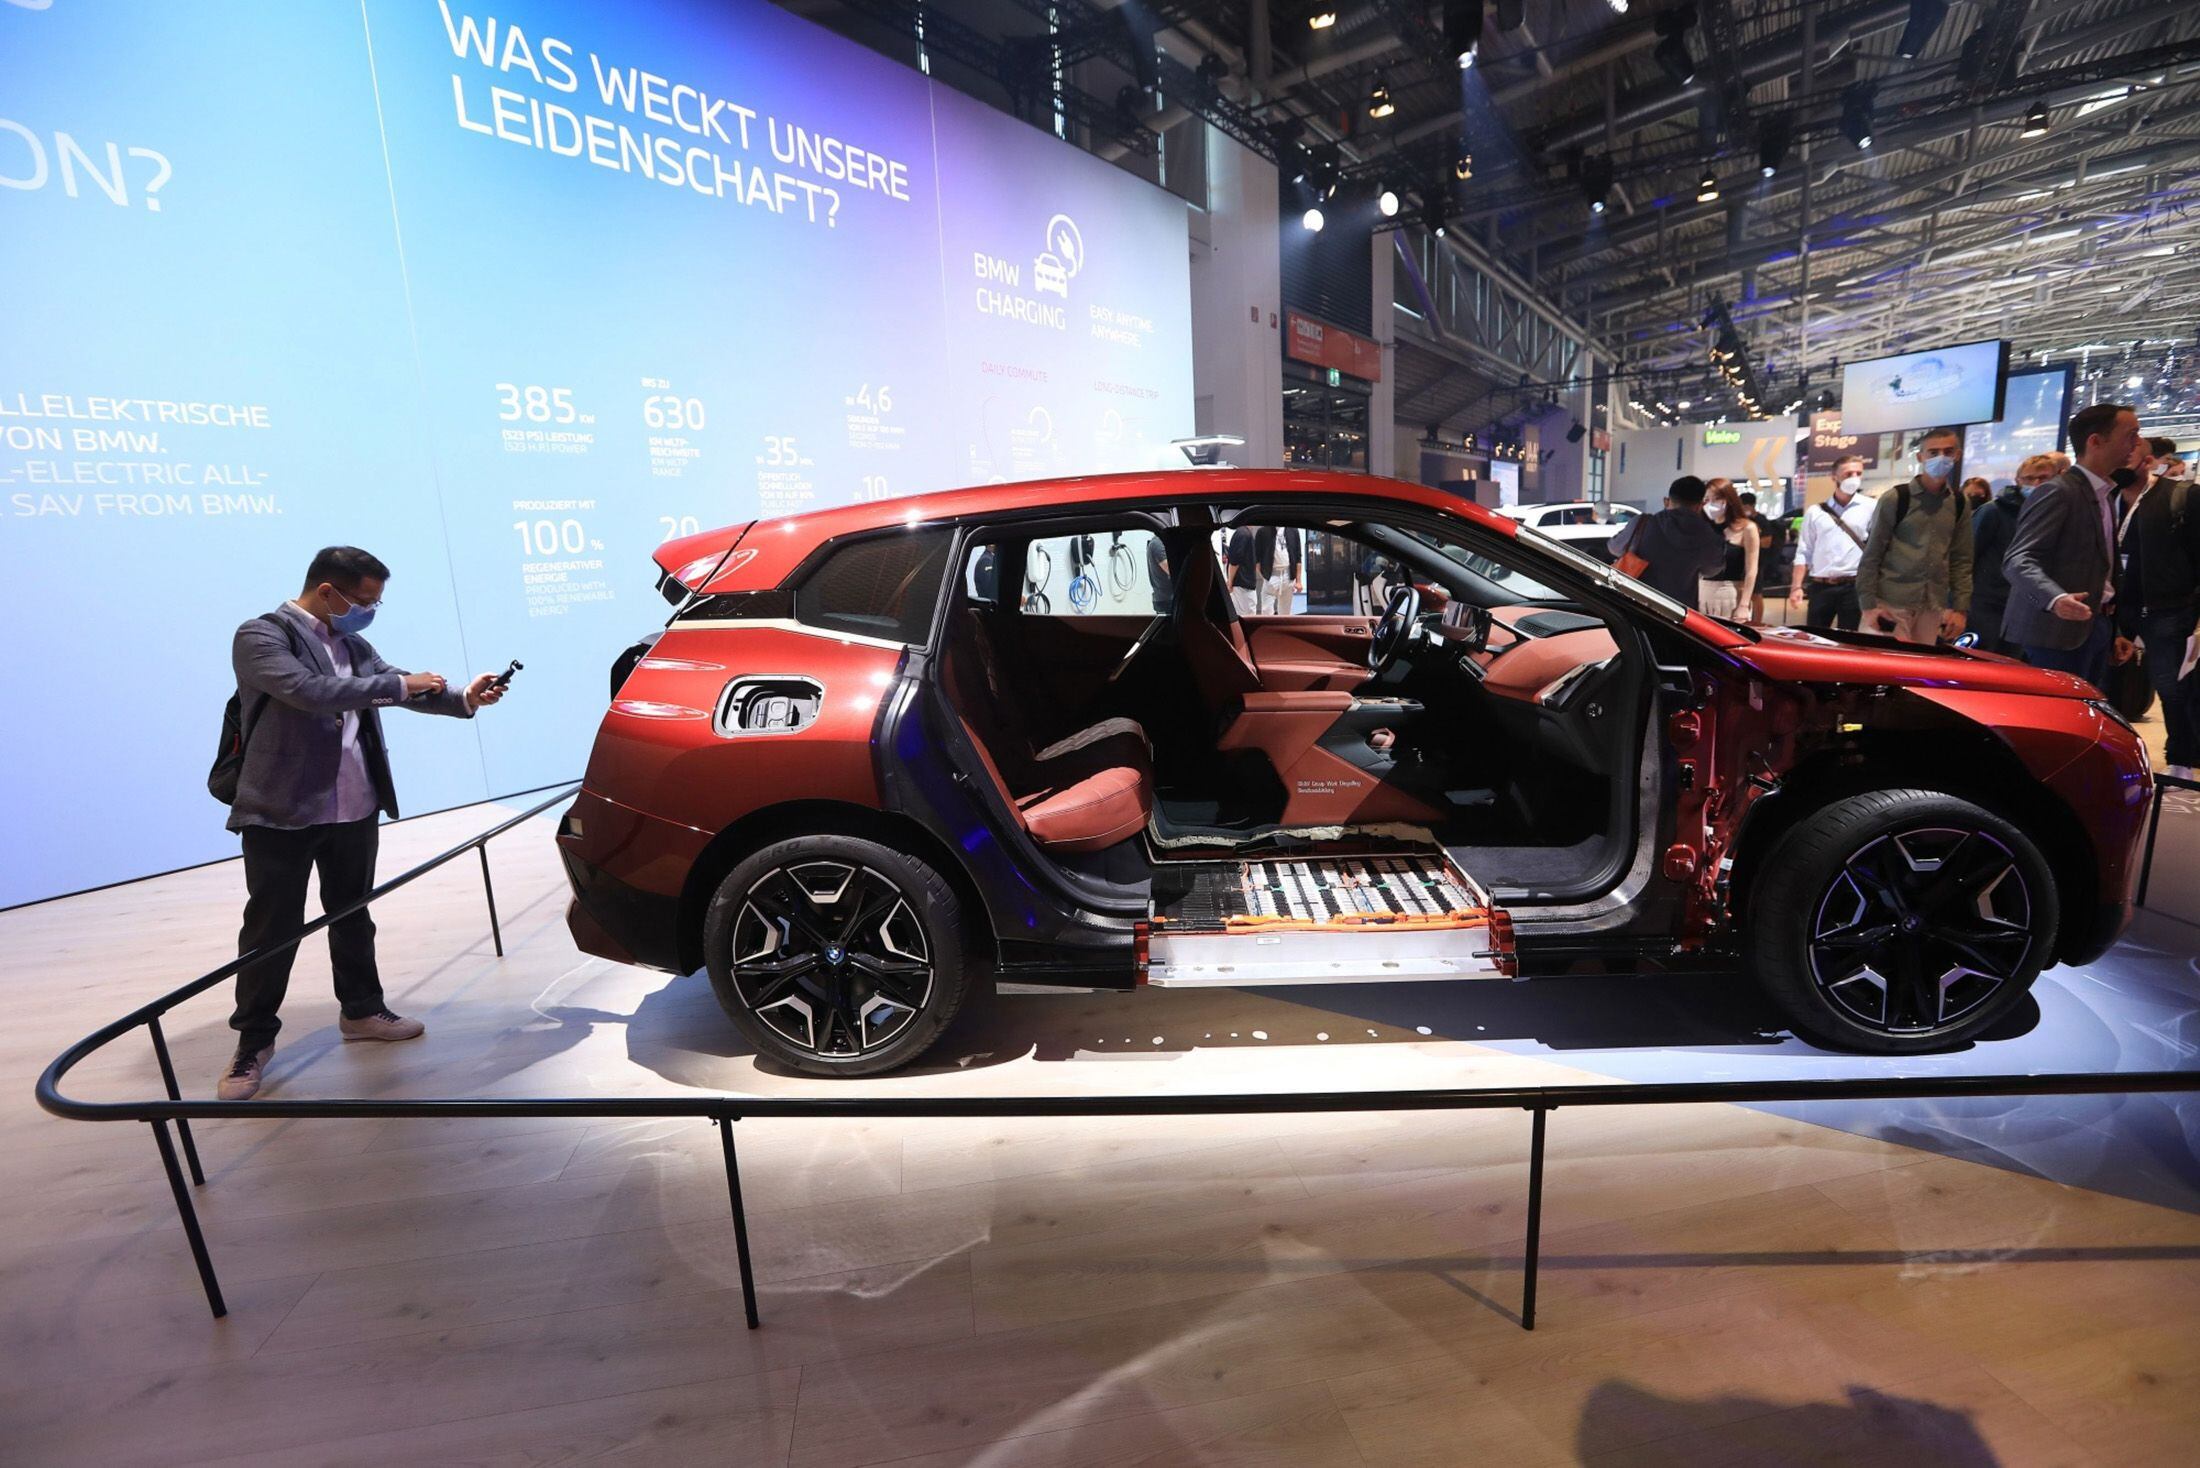 The Best Cars We Saw at the IAA Mobility Show in Munich